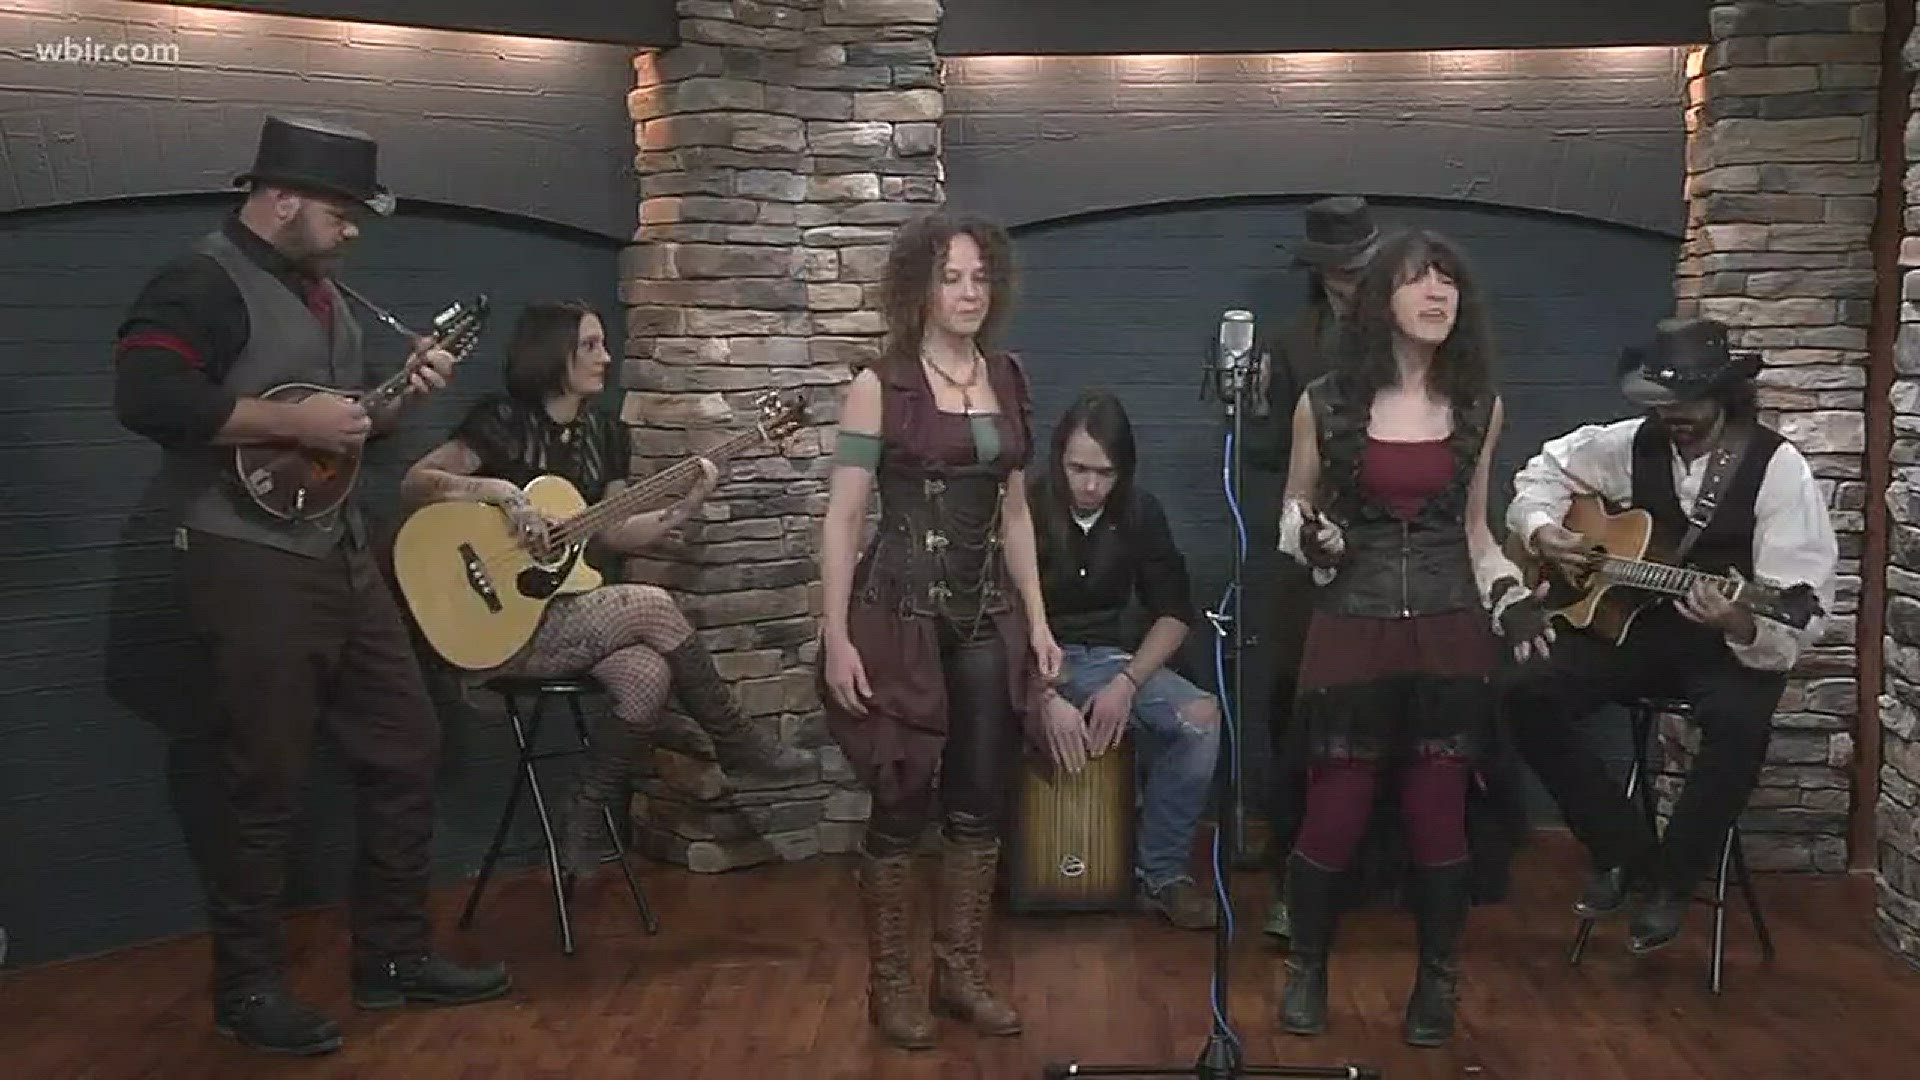 Gatlinburg-based band Tuatha Dea performs their new song "Get Along Home" which is part of the New Bristol Sessions. They'll perform at the Open Chord in Knoxville on Jan. 12 at 8pm.  For more information visit tuathadea.netJanuary 11, 2018-4pm